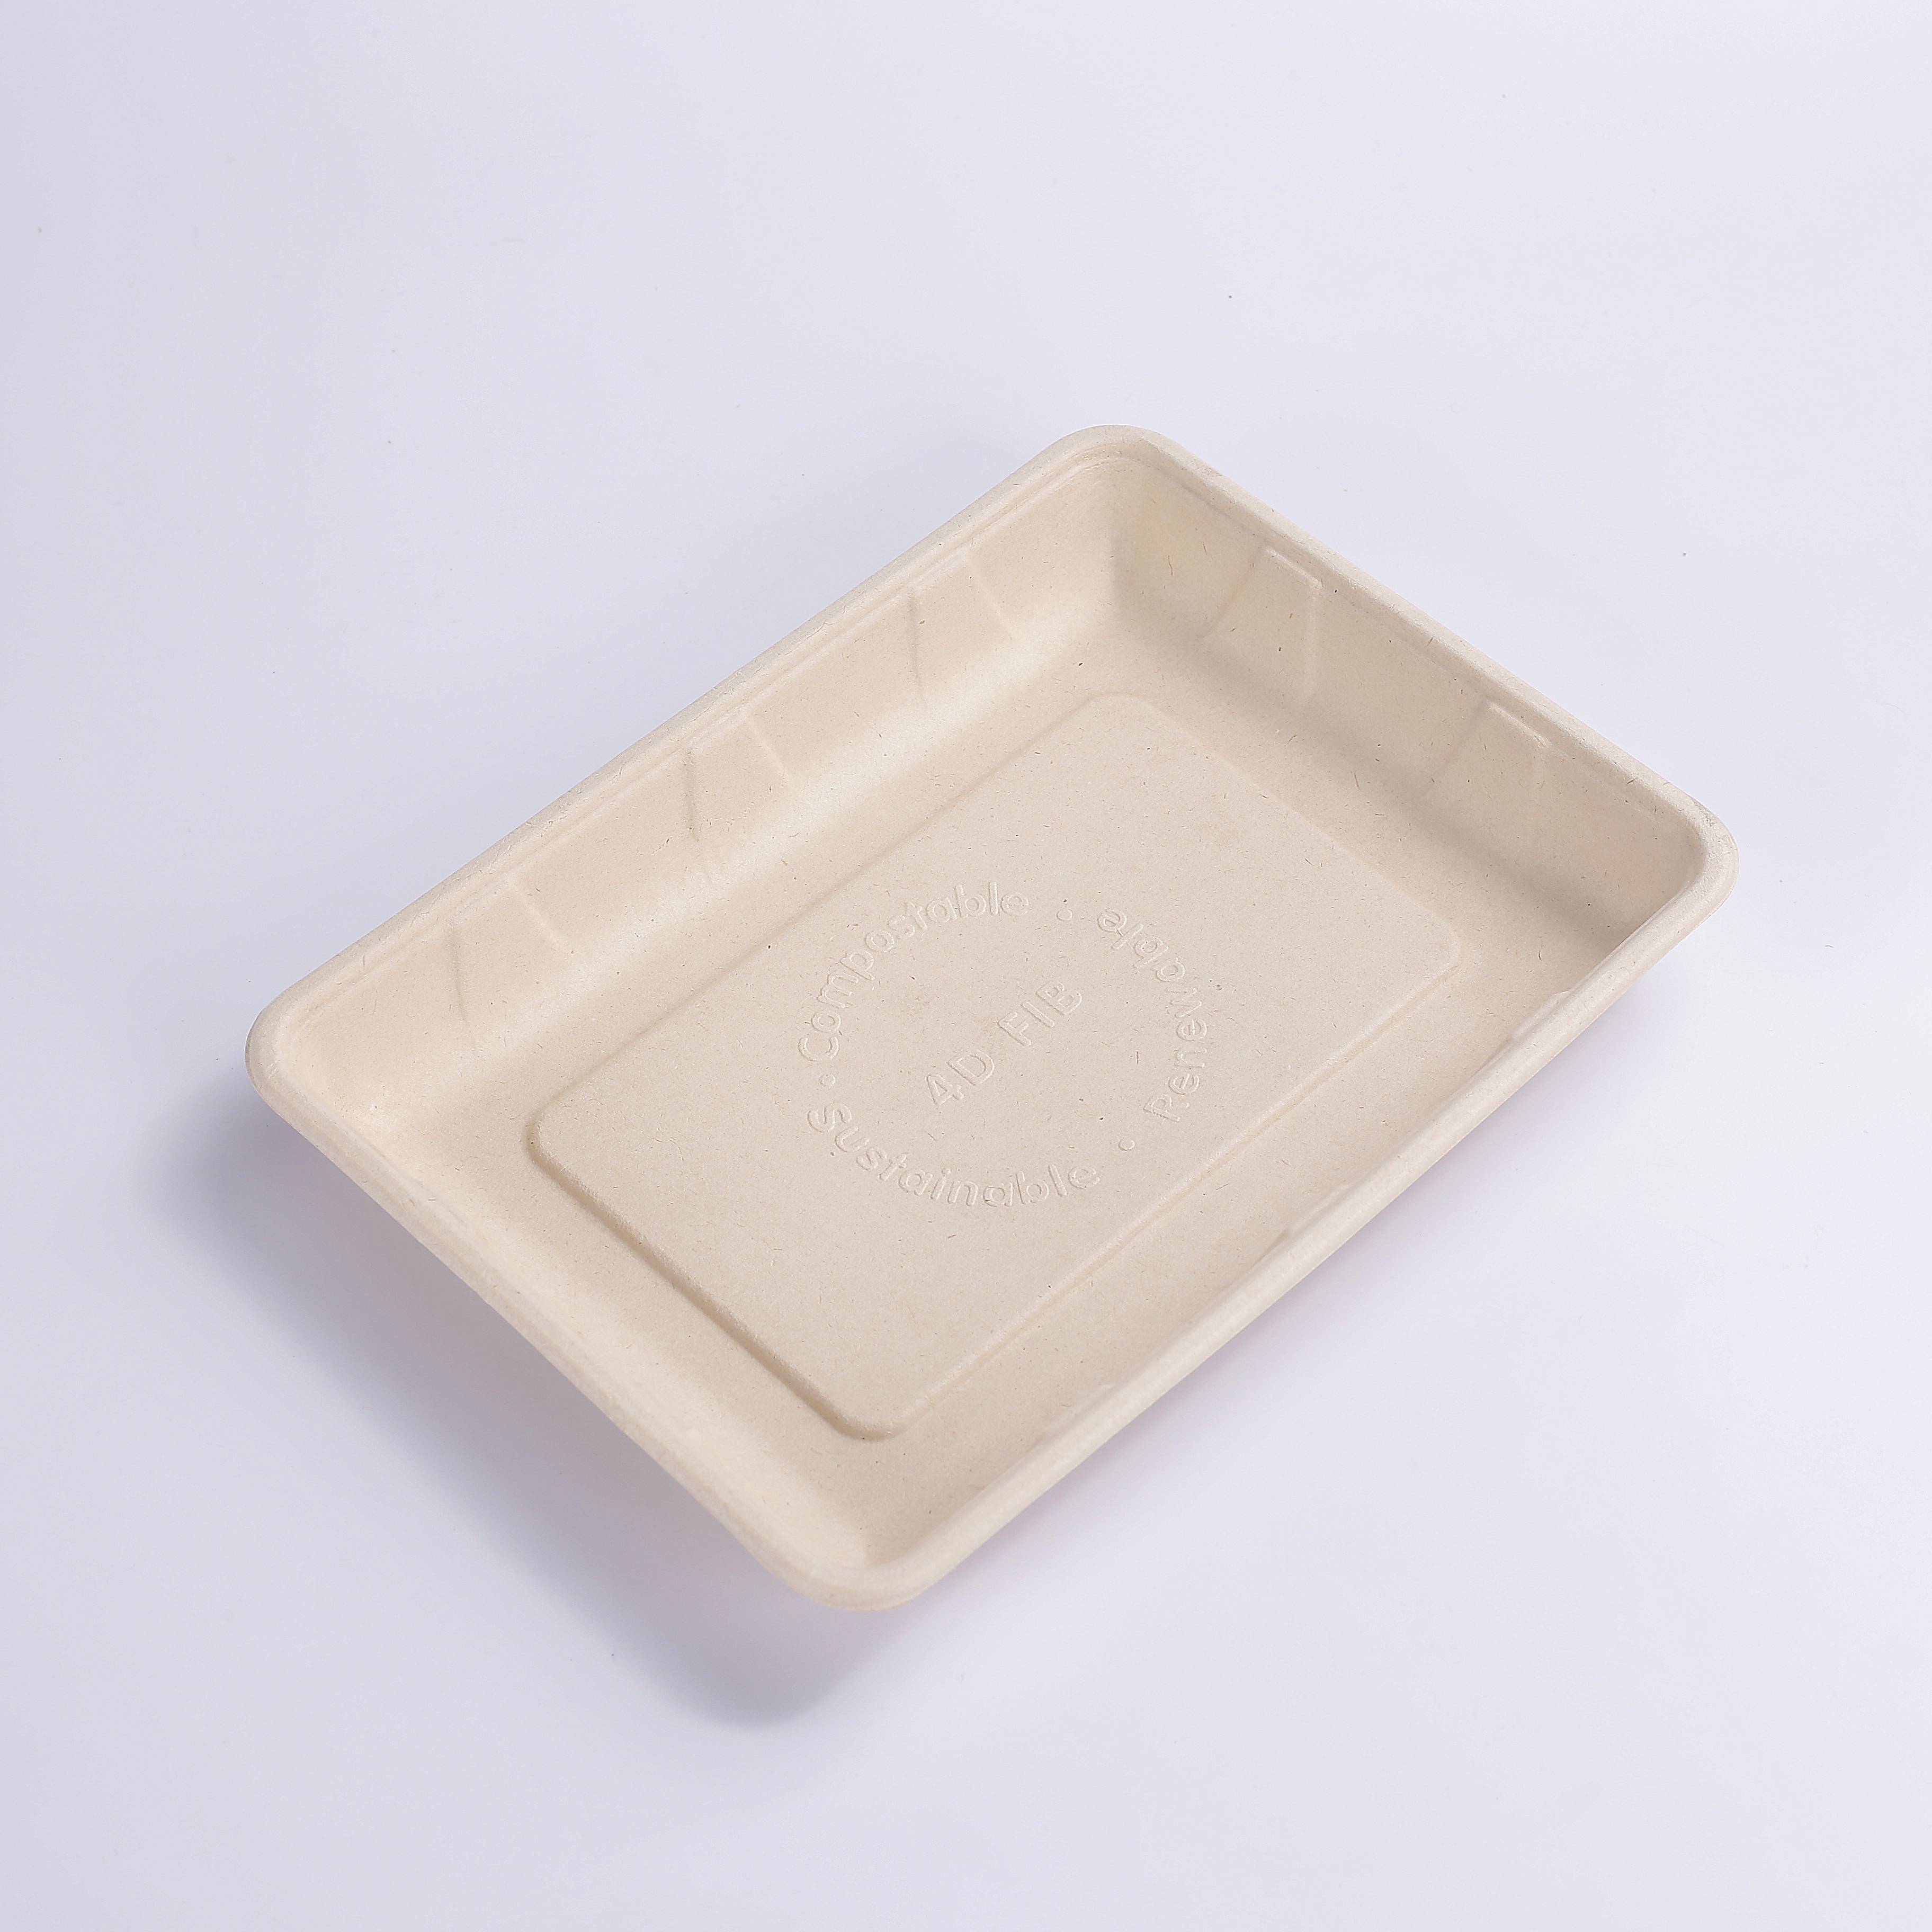 One of Hottest for Take Away Sugar Cane - 9.5*7 INCH Compostable Heavy-Duty Disposable Food BBQ Fruit Tray, Microwave Paper Plates Waterproof and Oil-Proof Heavy Duty Trays, 100% Biodegradable Rec...